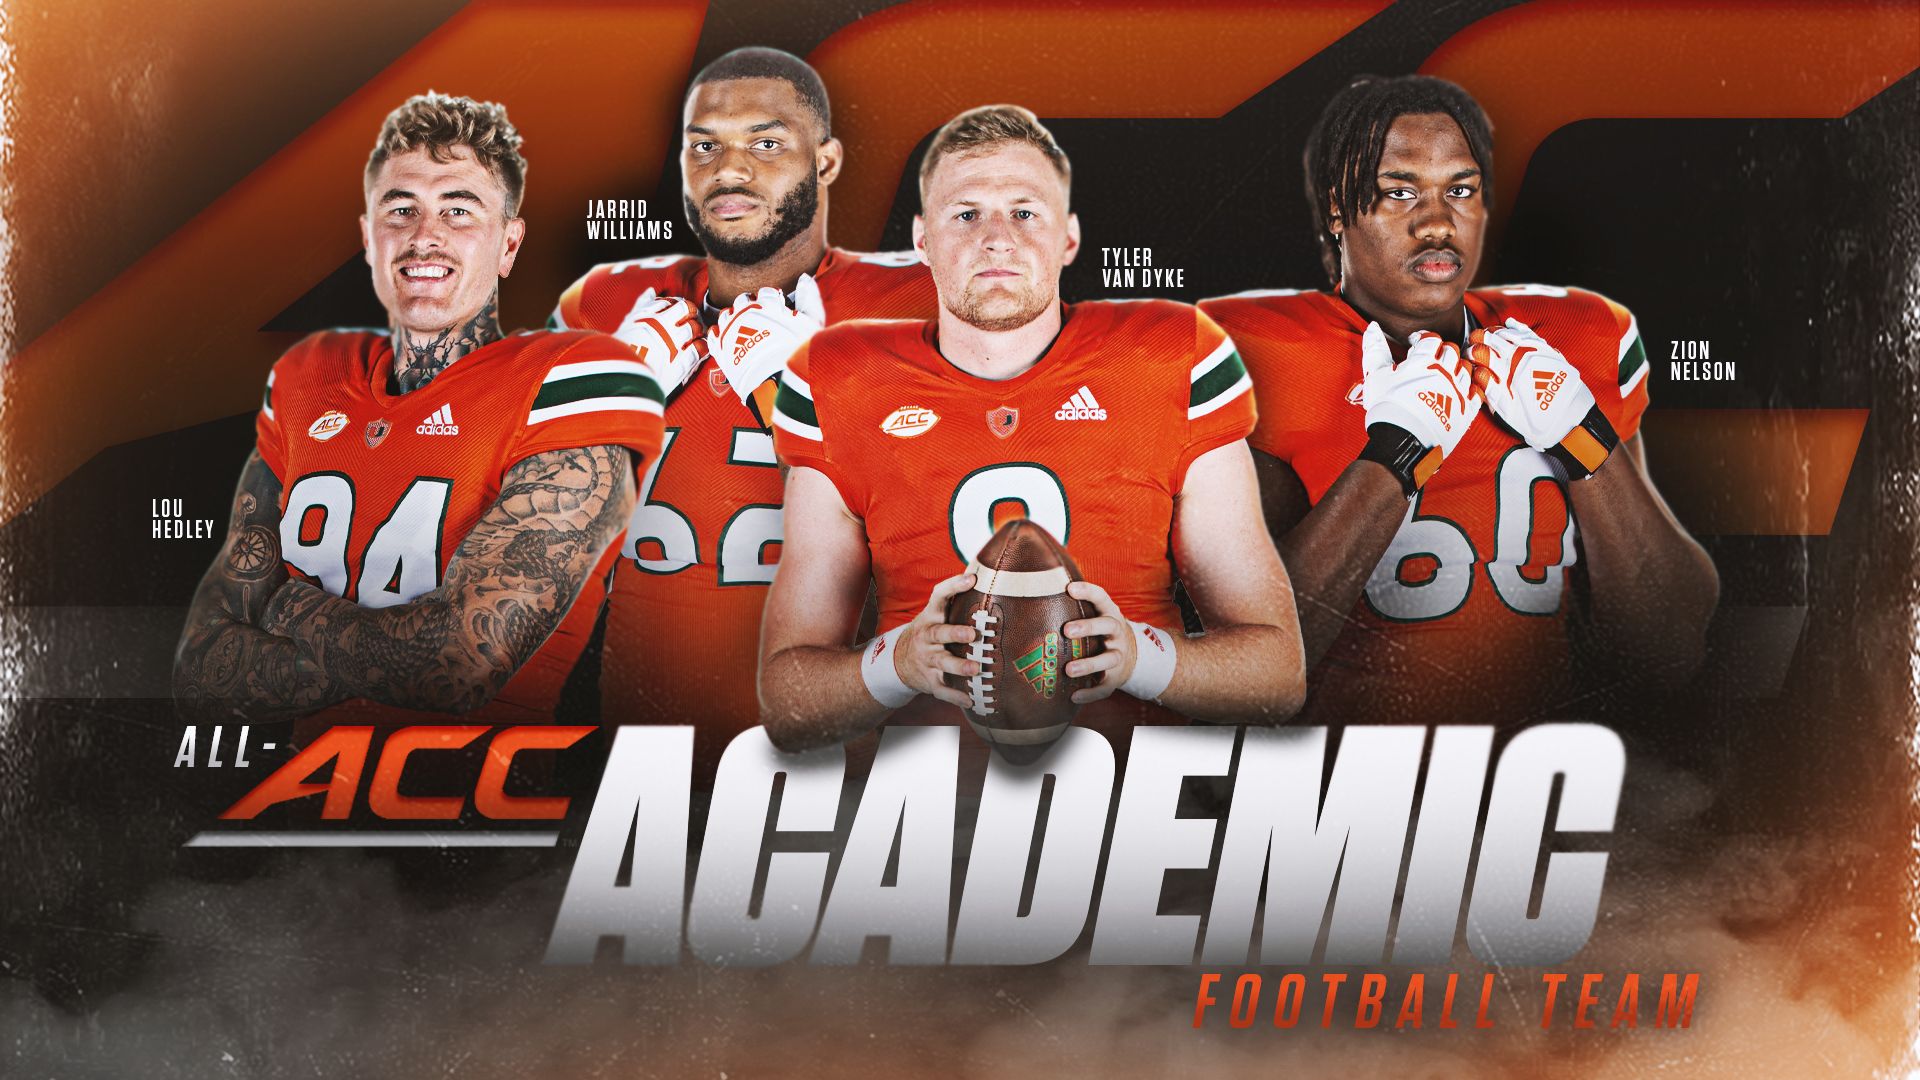 Four Named to All-ACC Academic Football Team